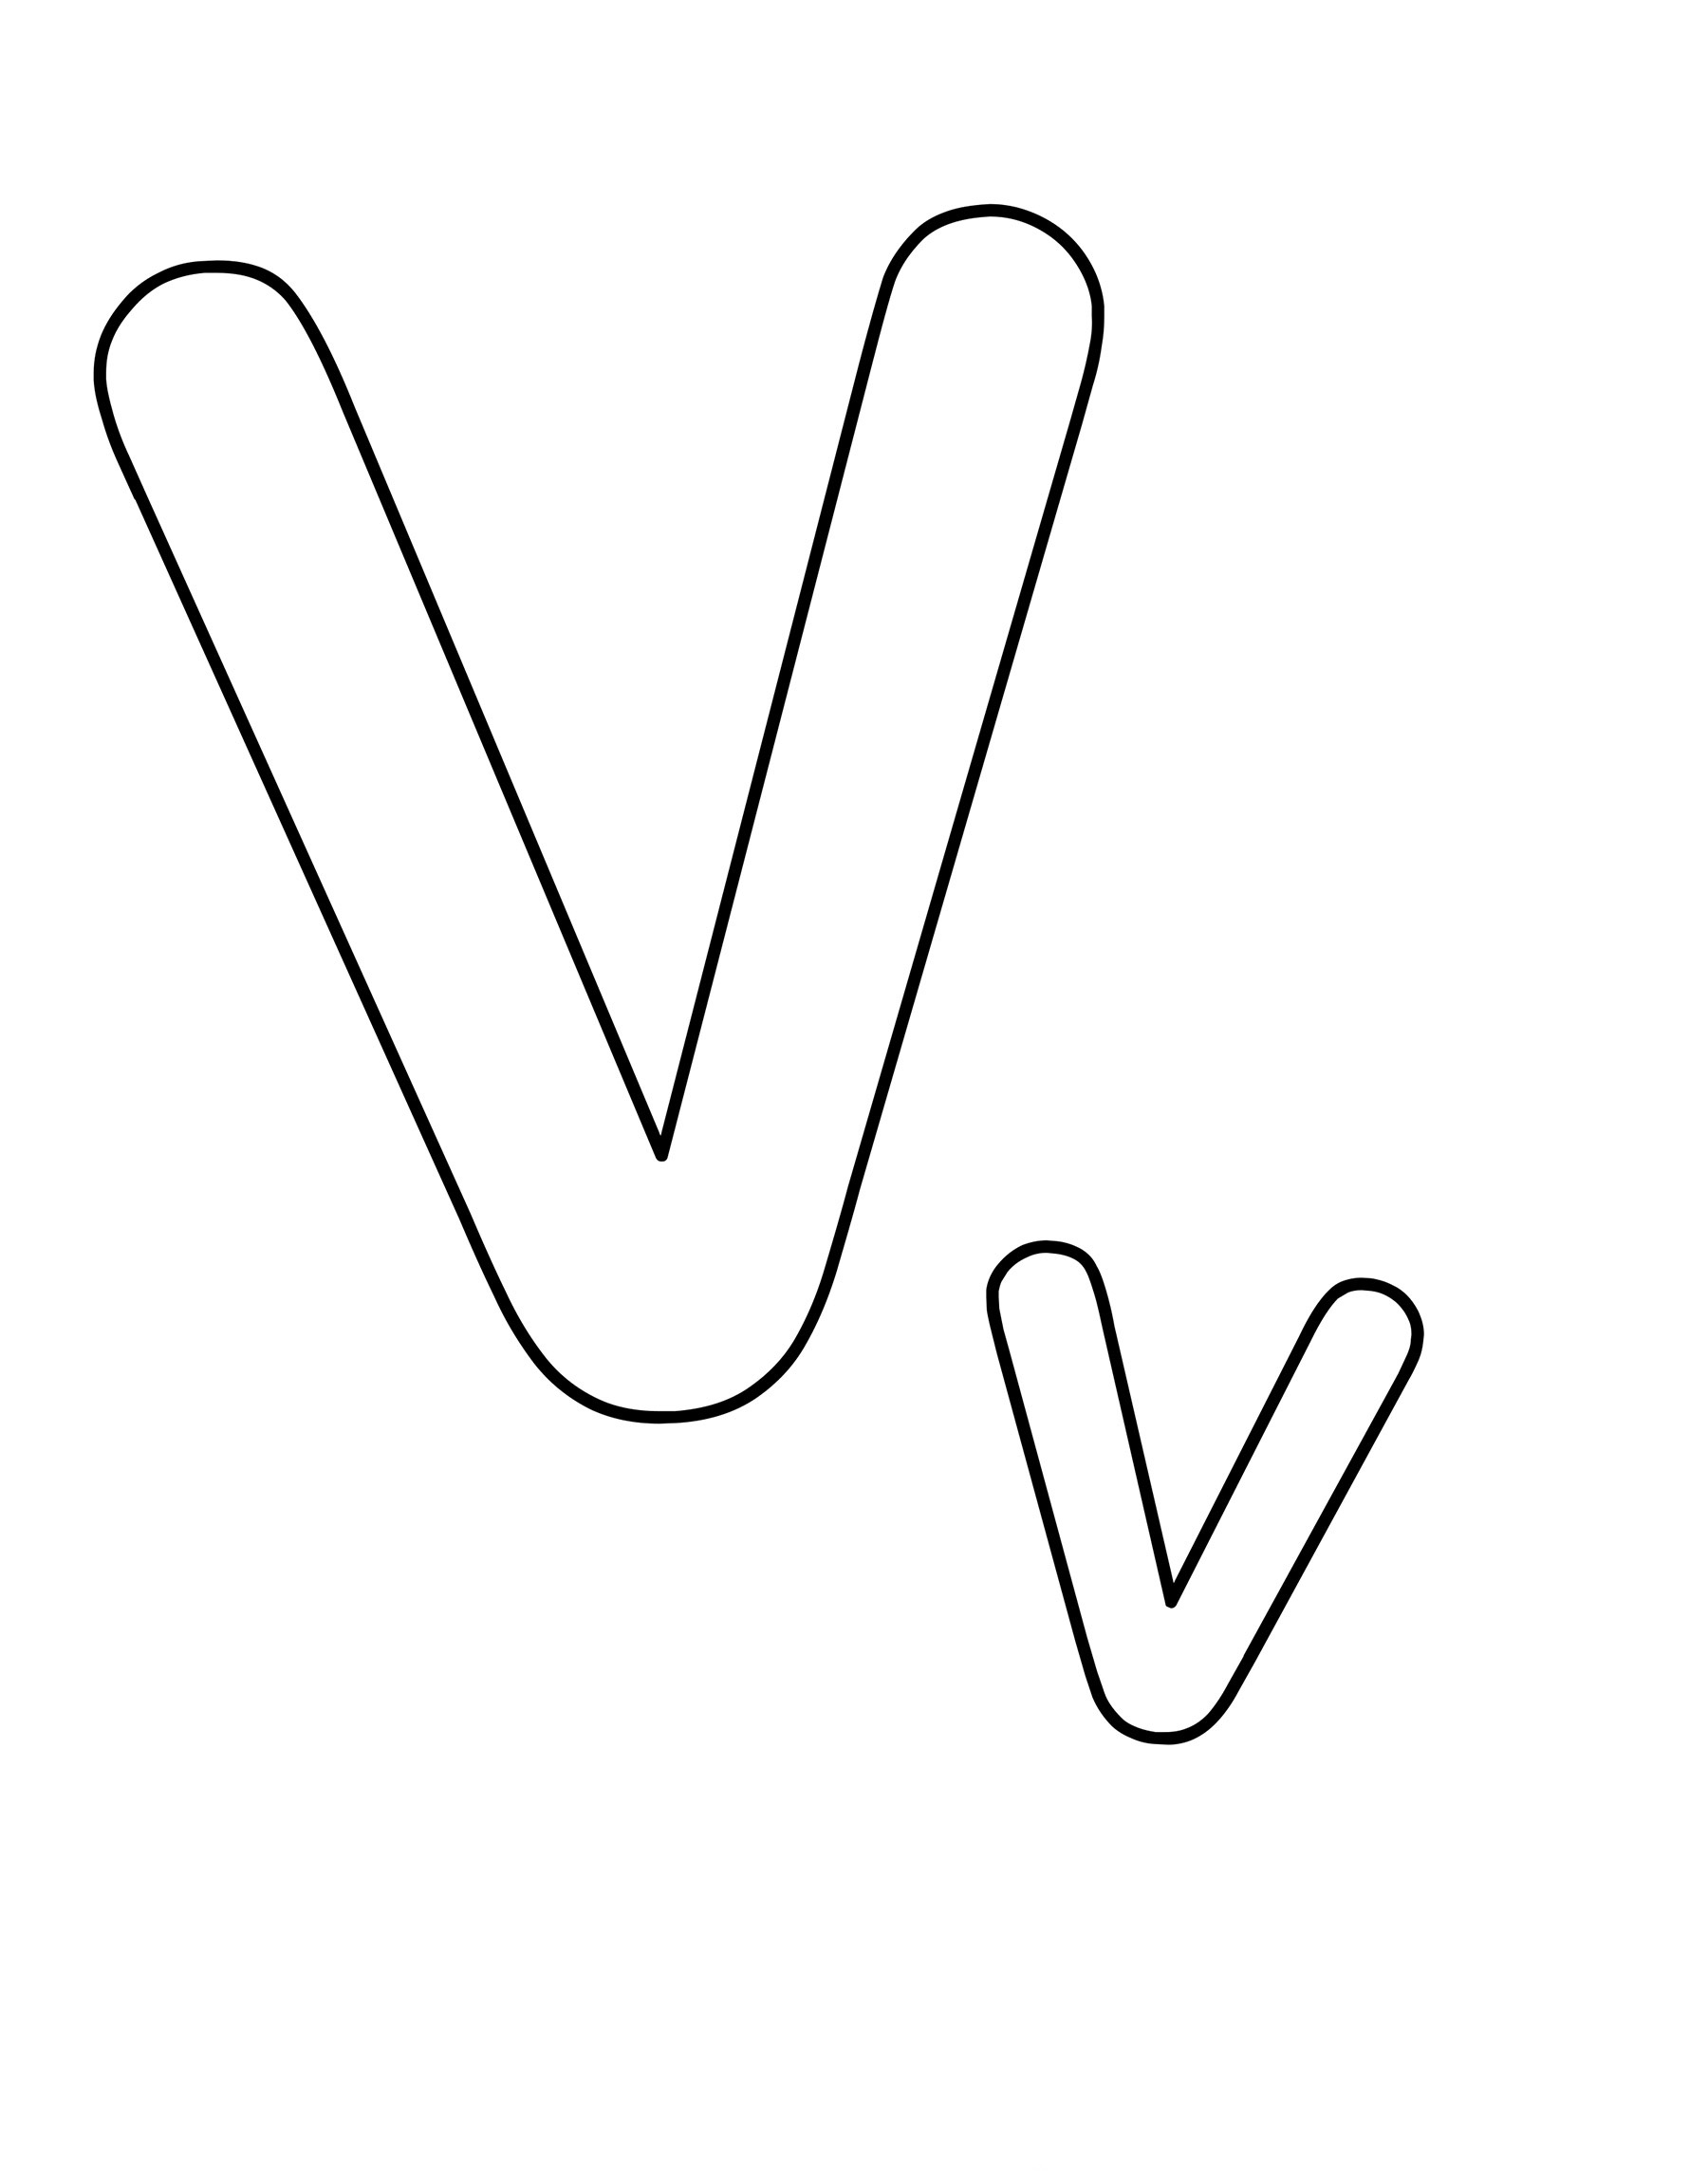 free-printable-letter-v-coloring-pages-sports-college-alphabet